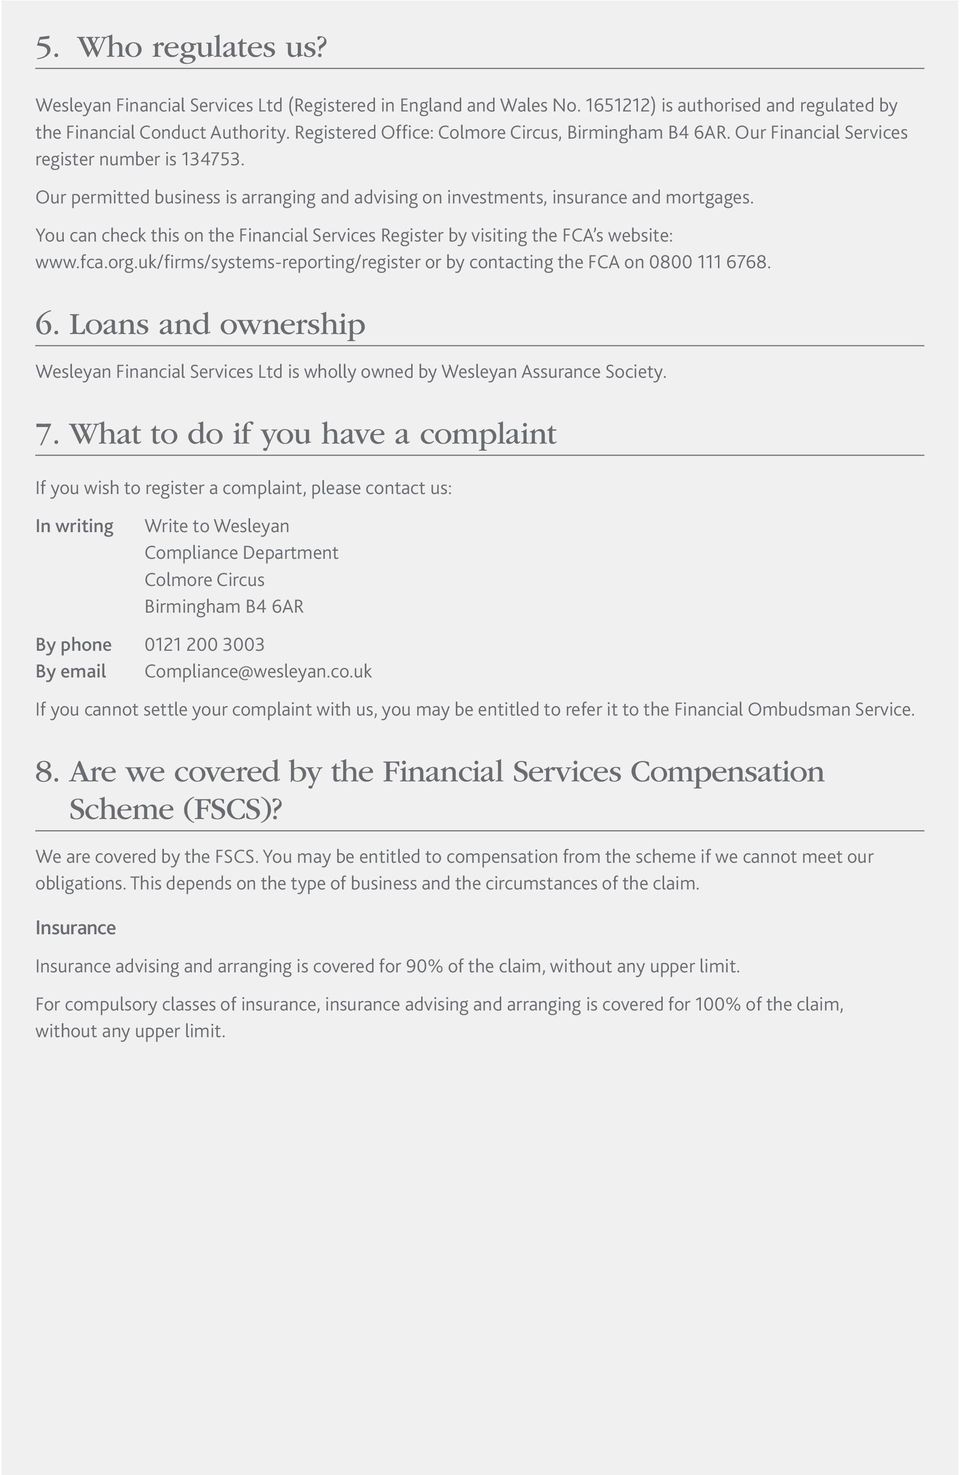 You can check this on the Financial Services Register by visiting the FCA s website: www.fca.org.uk/firms/systems-reporting/register or by contacting the FCA on 0800 111 67